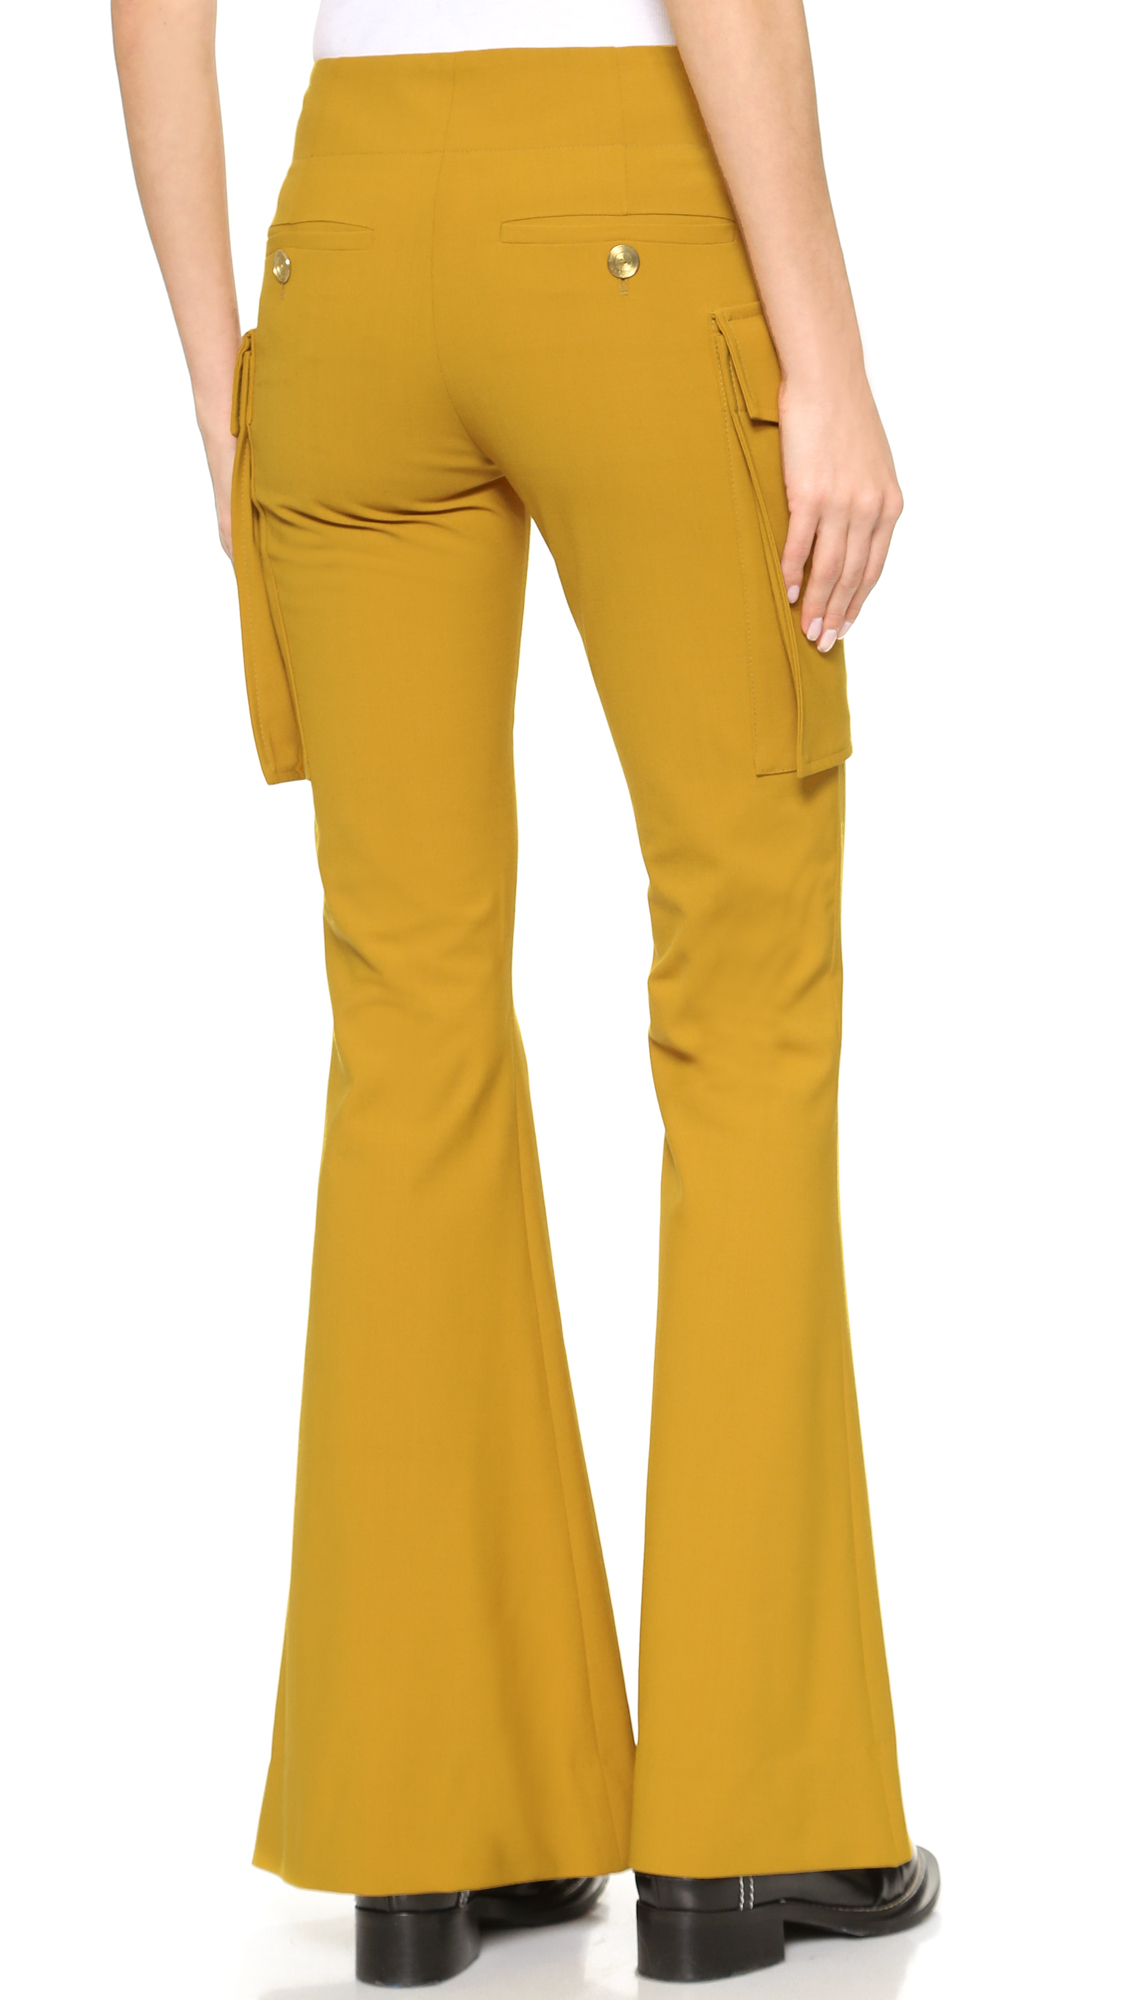 Lyst - Acne Studios Mello Patch Pocket Flare Pants - Mustard in Yellow